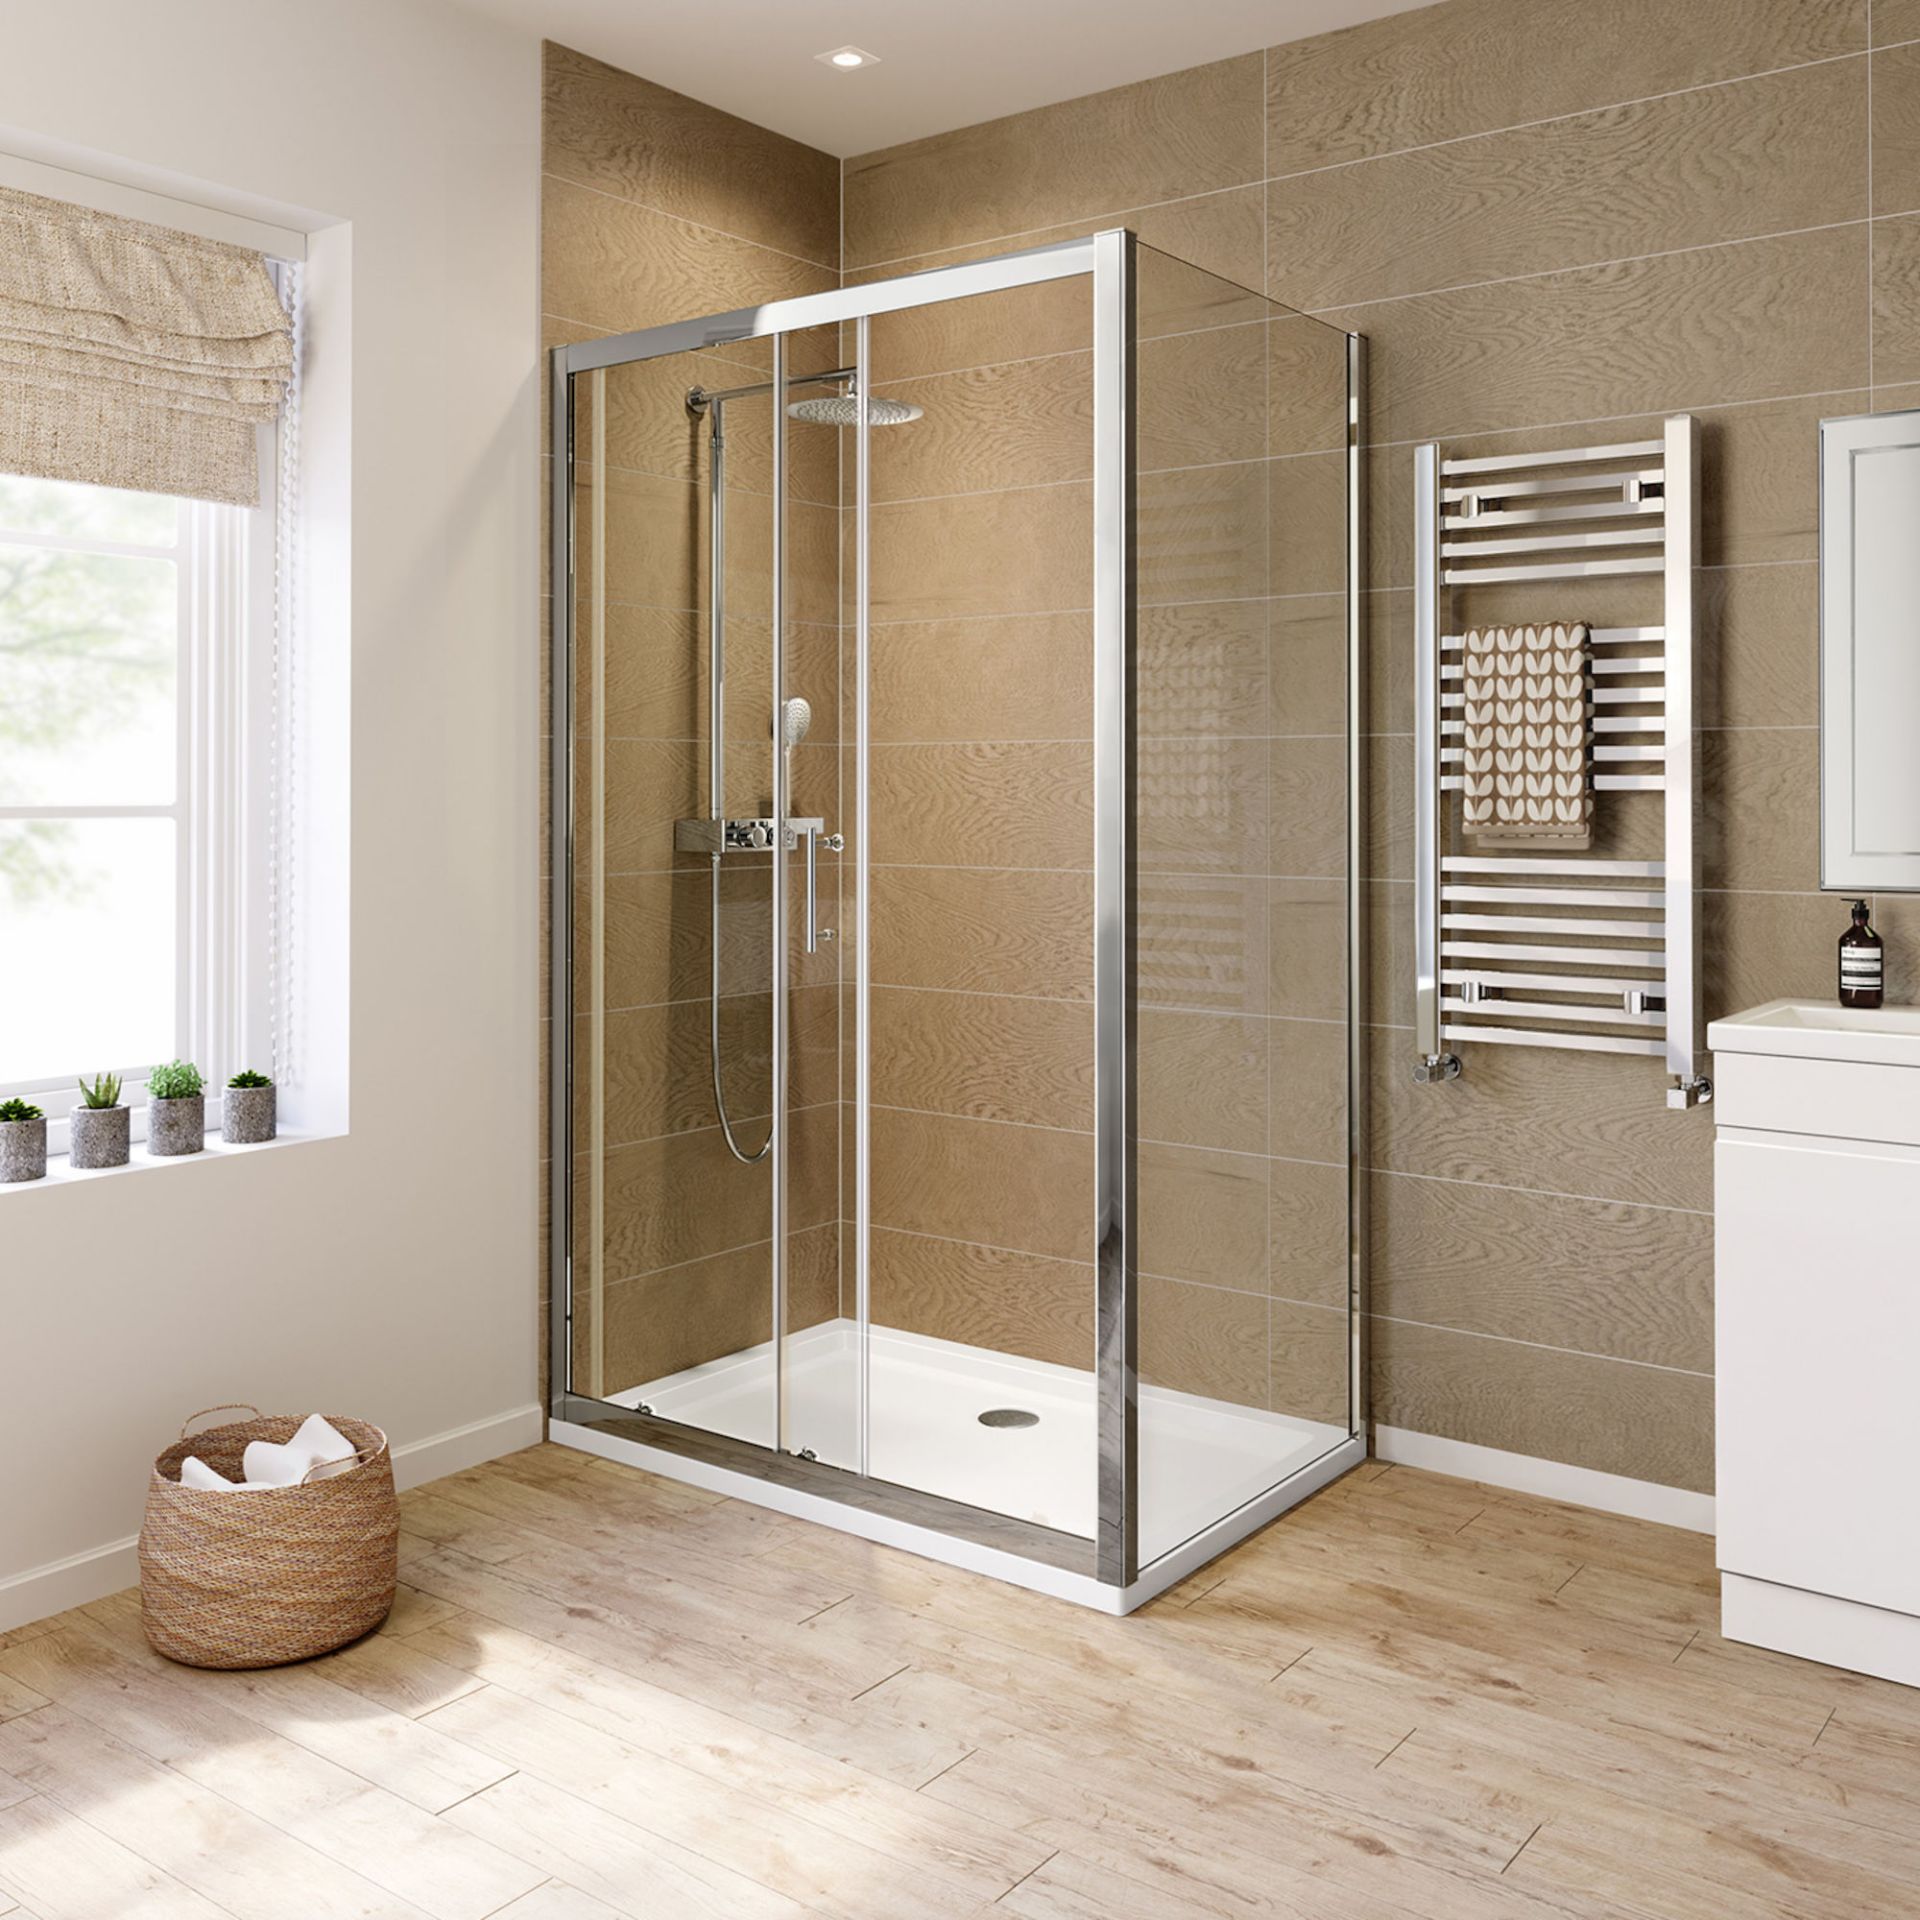 (HP100) 1000x760mm - 6mm - Elements Sliding Door Shower Enclosure. RRP £449.99. 6mm Safety Glass - Image 4 of 4